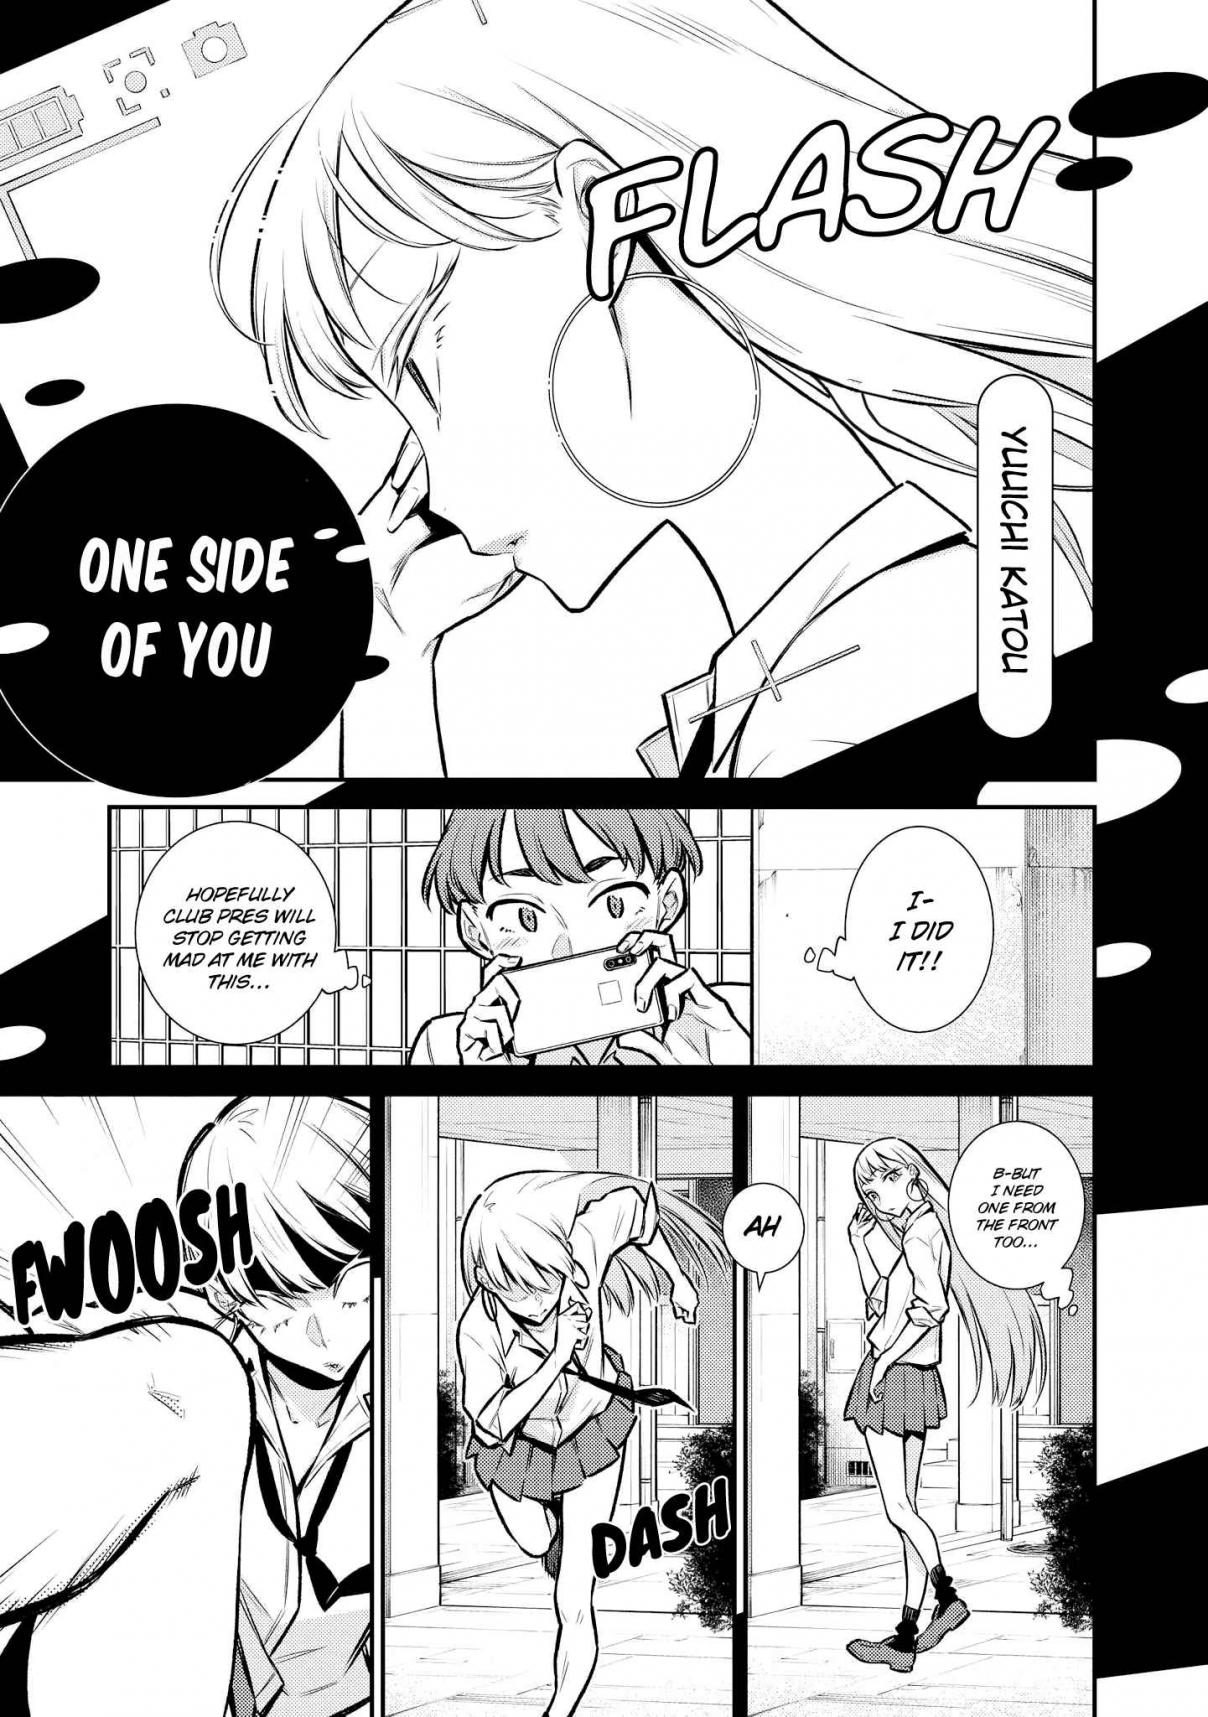 Just Flirting With a Cute, Annoying Kouhai Vol. 1 Ch. 1 One Side of You